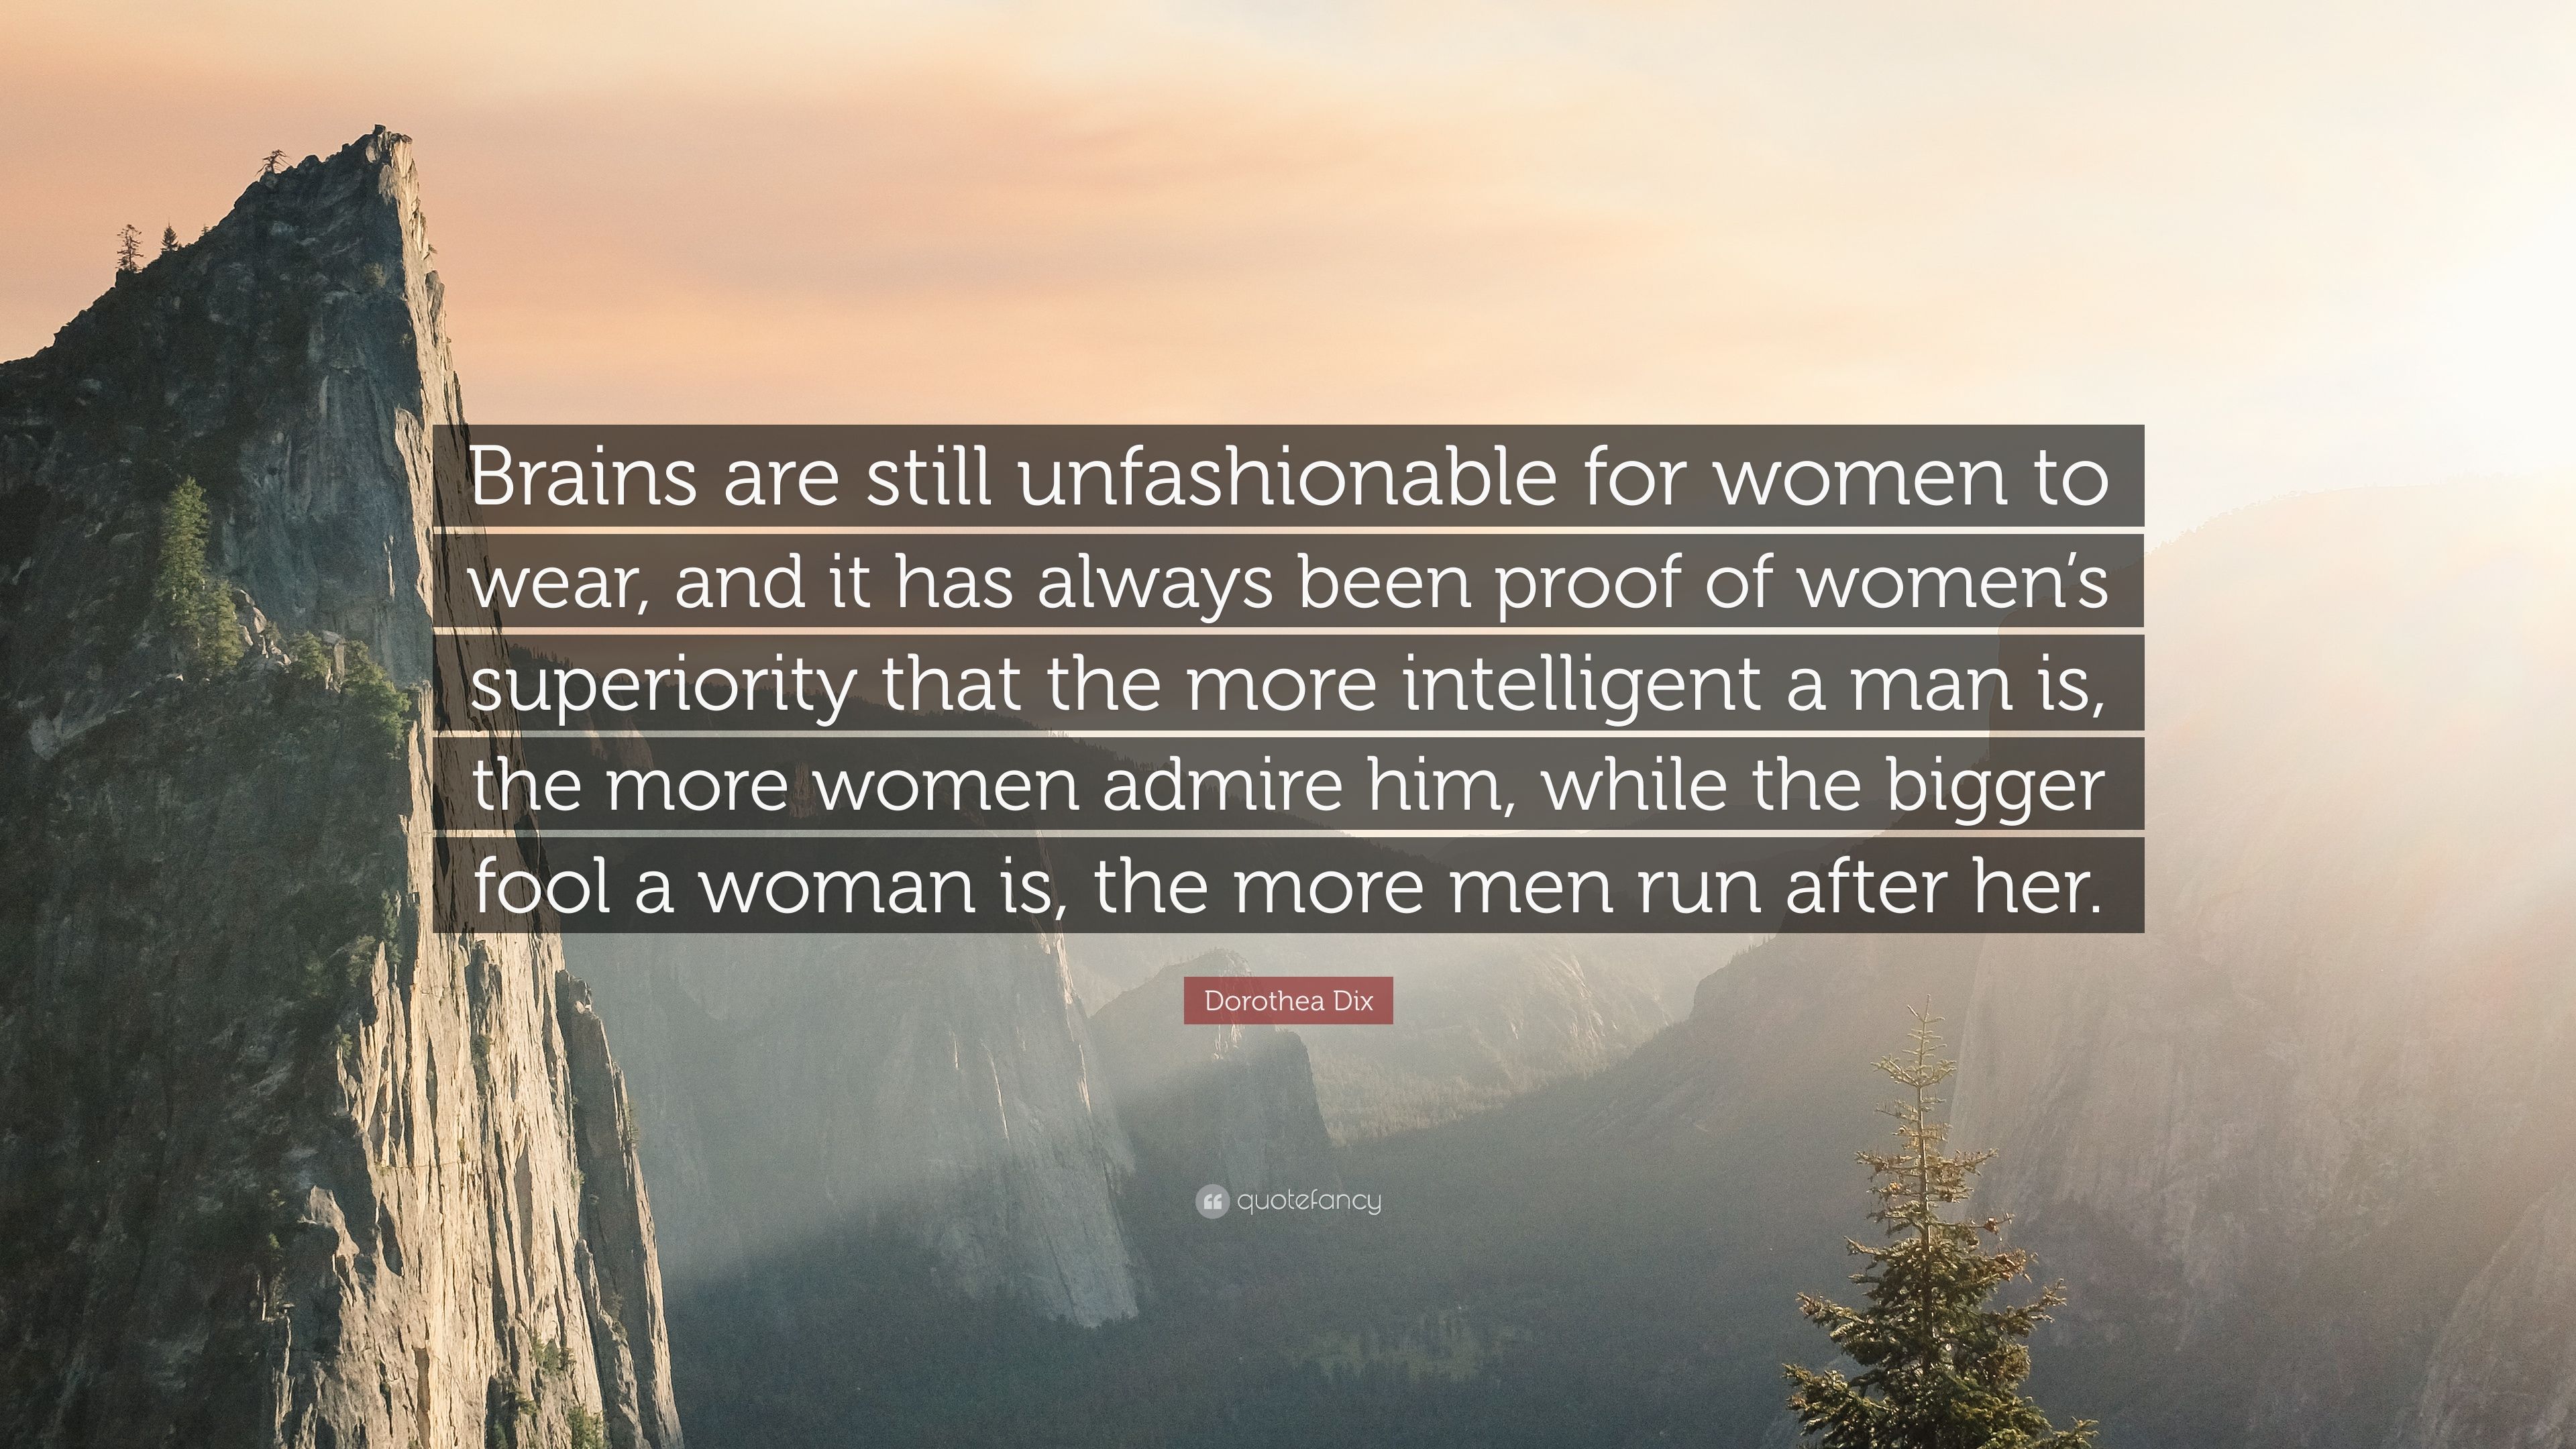 Dorothea Dix Quote: “Brains are still unfashionable for women to